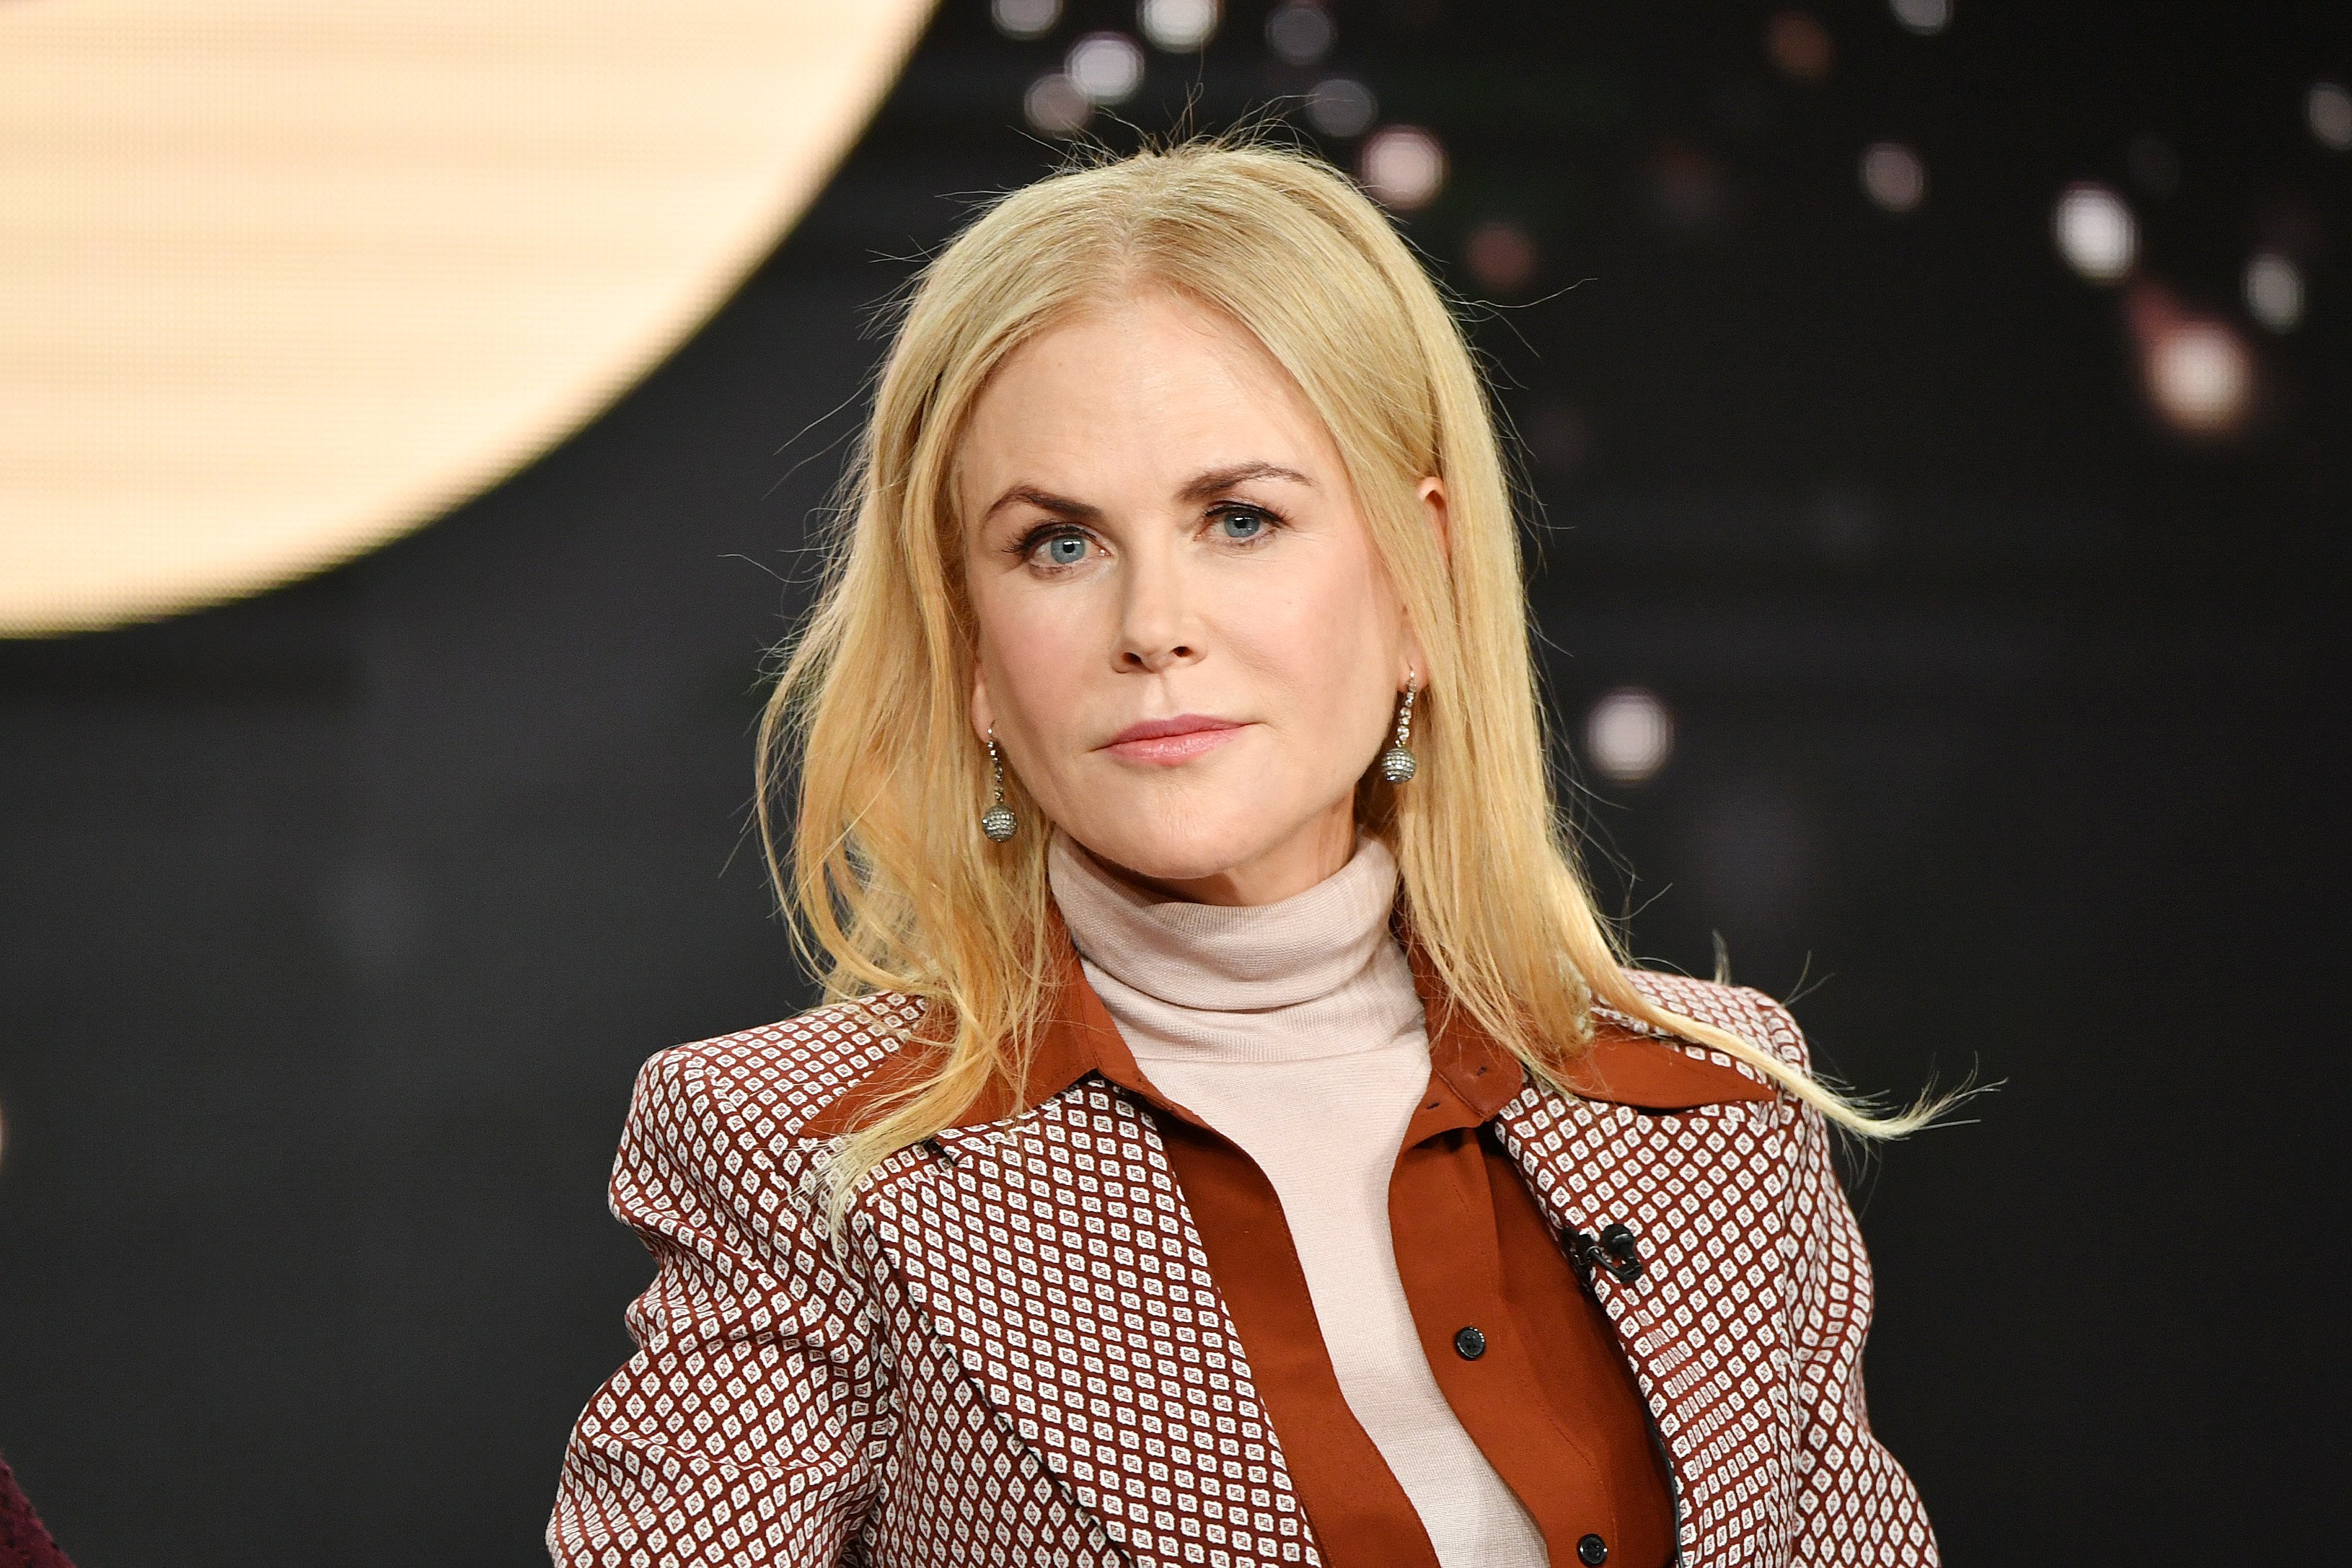 Nicole Kidman speaks during the HBO segment of the 2020 Winter TCA Press Tour at The Langham Huntington on January 15, 2020 in Pasadena, California | Photo: Getty Images